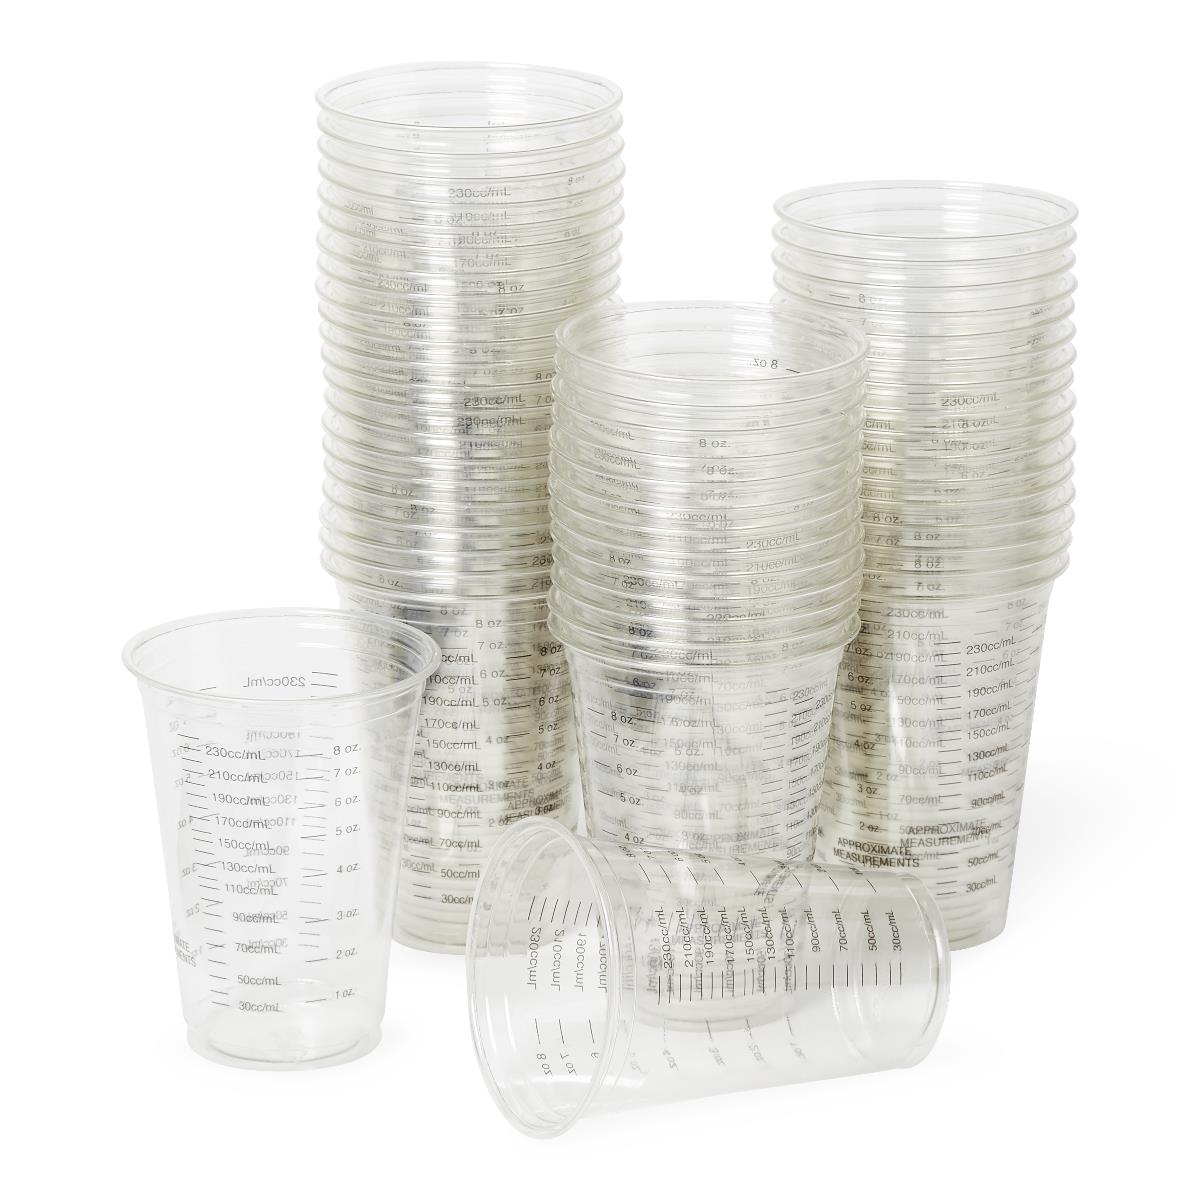 Medline Disposable Graduated Cold Plastic Drinking Cups - 10 oz, Clear with Black Graduations Each